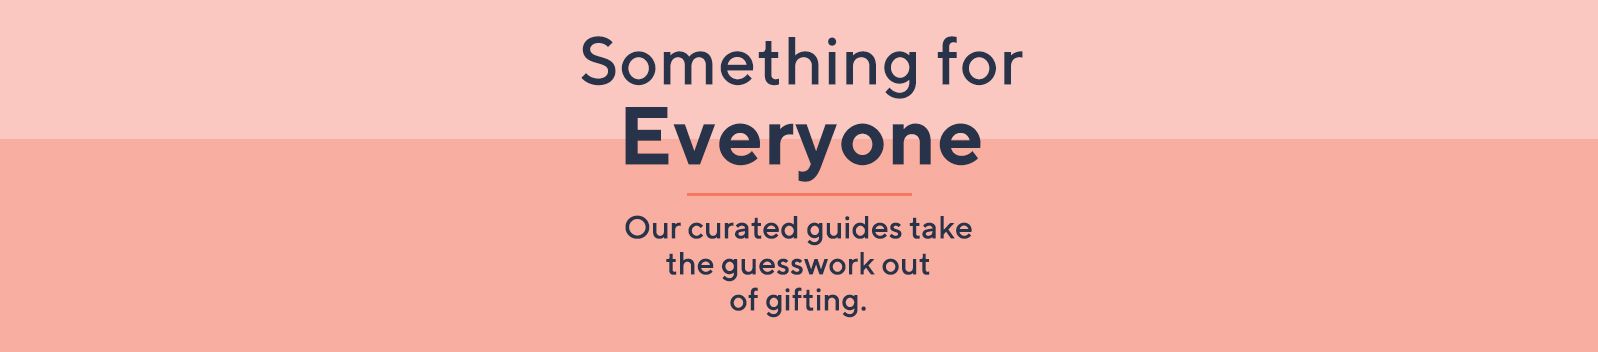 Something for Everyone.  Our curated guides take the guesswork out of gifting.